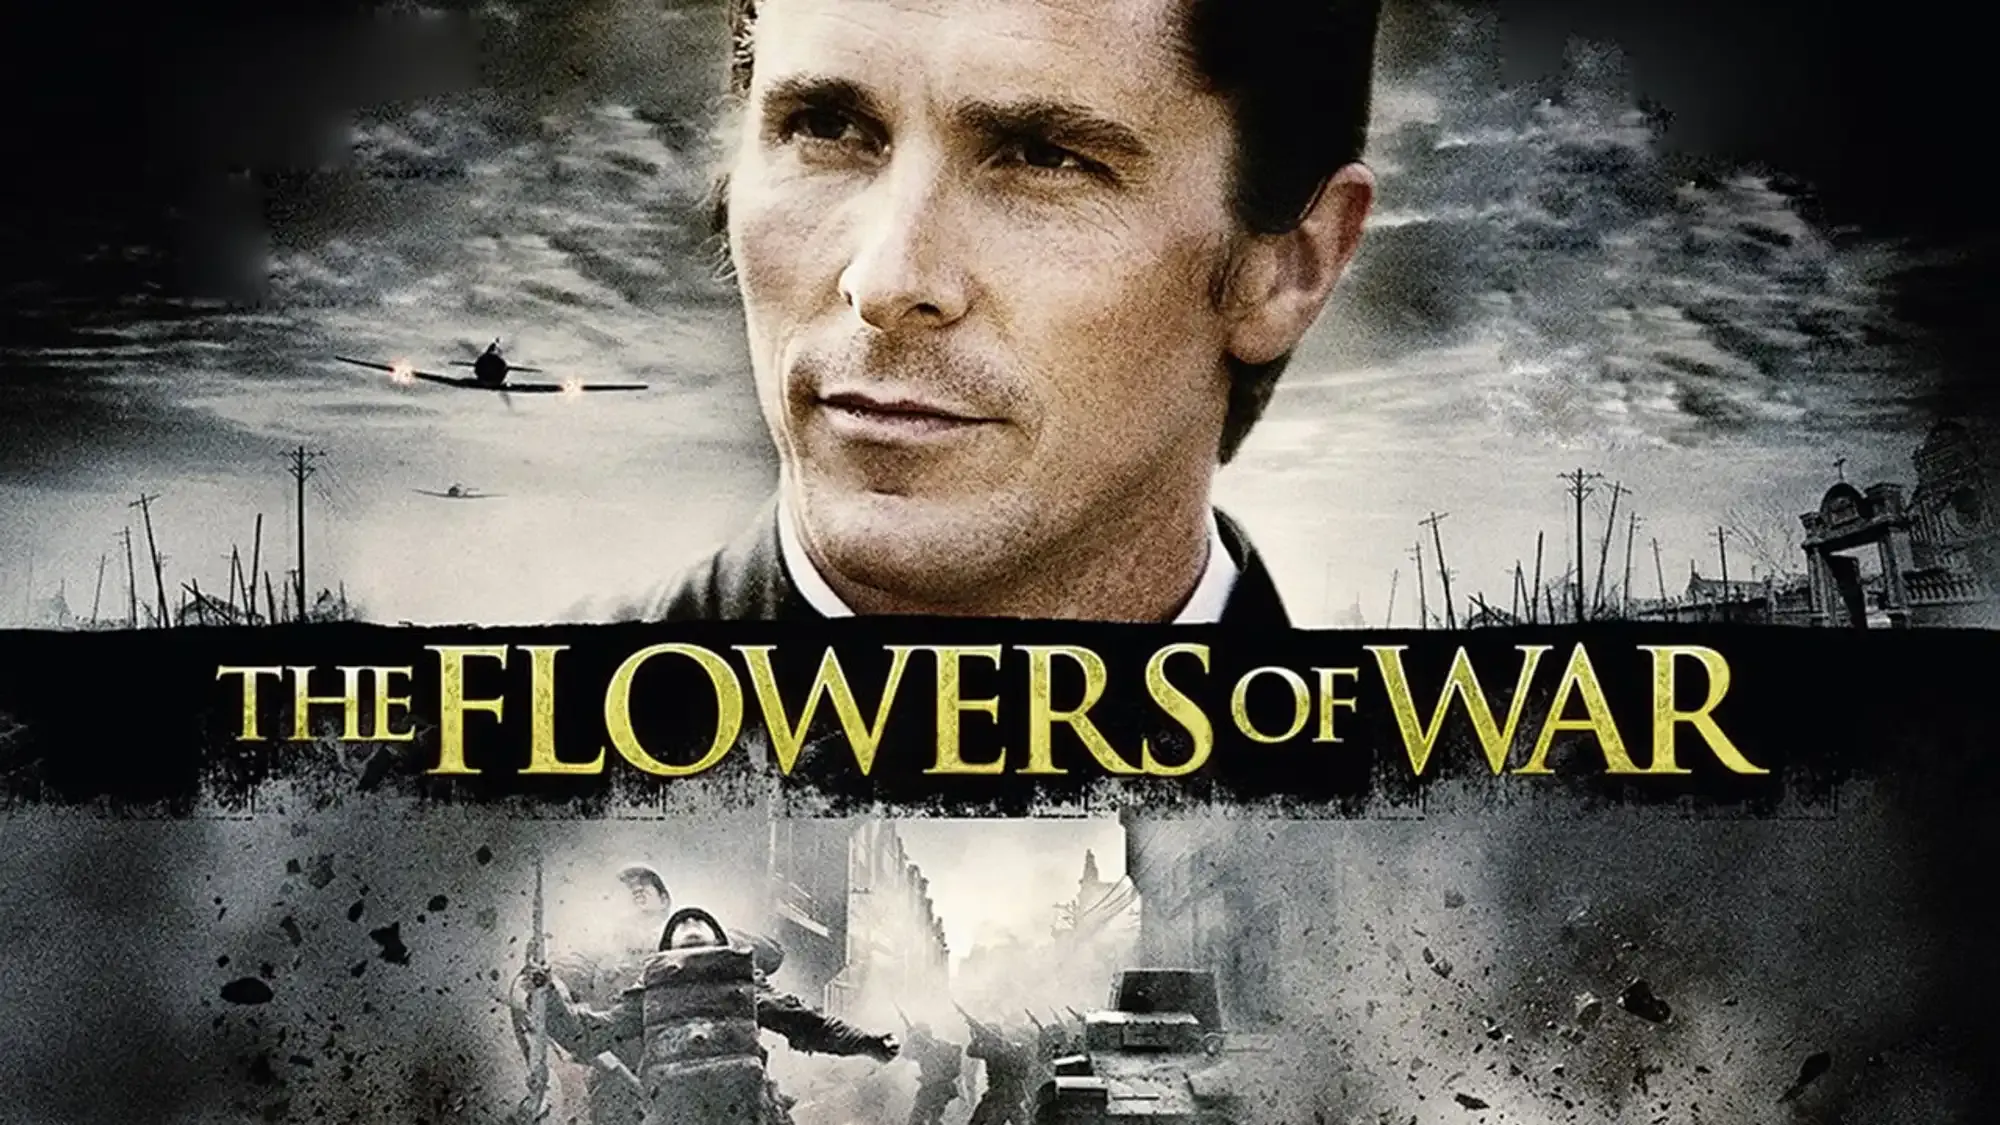 The Flowers of War movie review